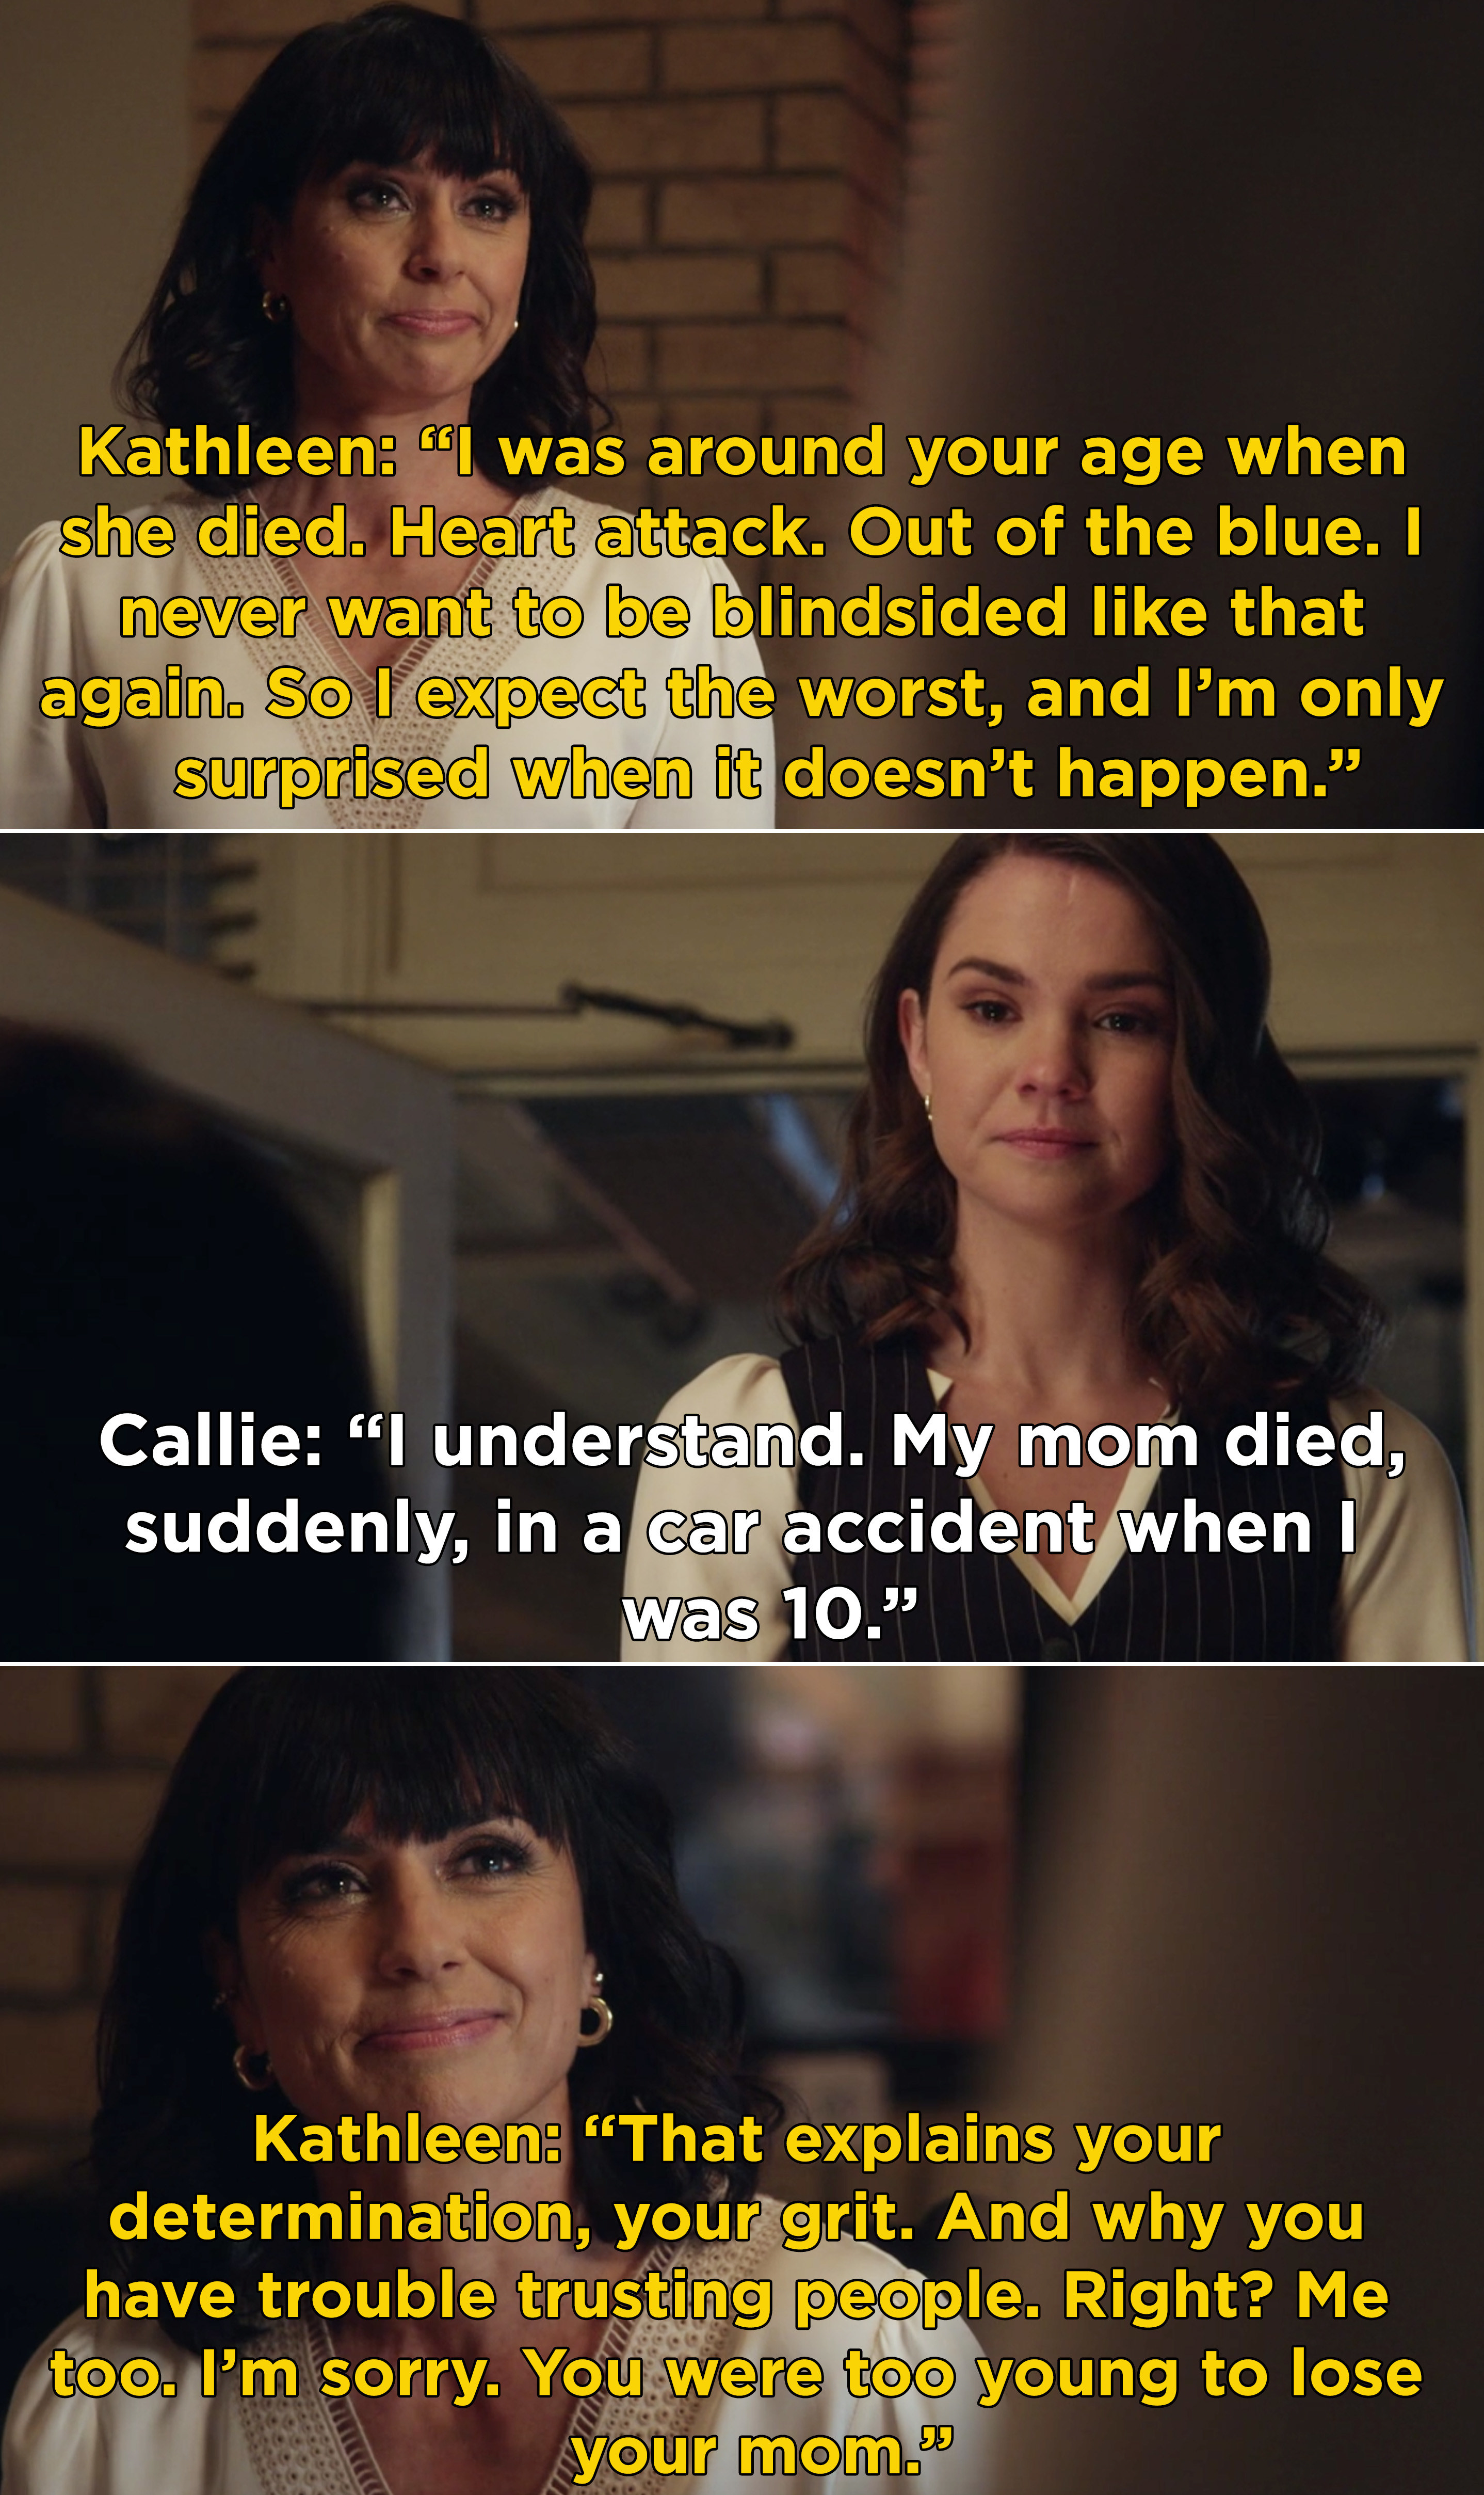 Kathleen saying that Callie&#x27;s mom dying when she was young explains her determination and that she was &quot;too young&quot; to lose her mom